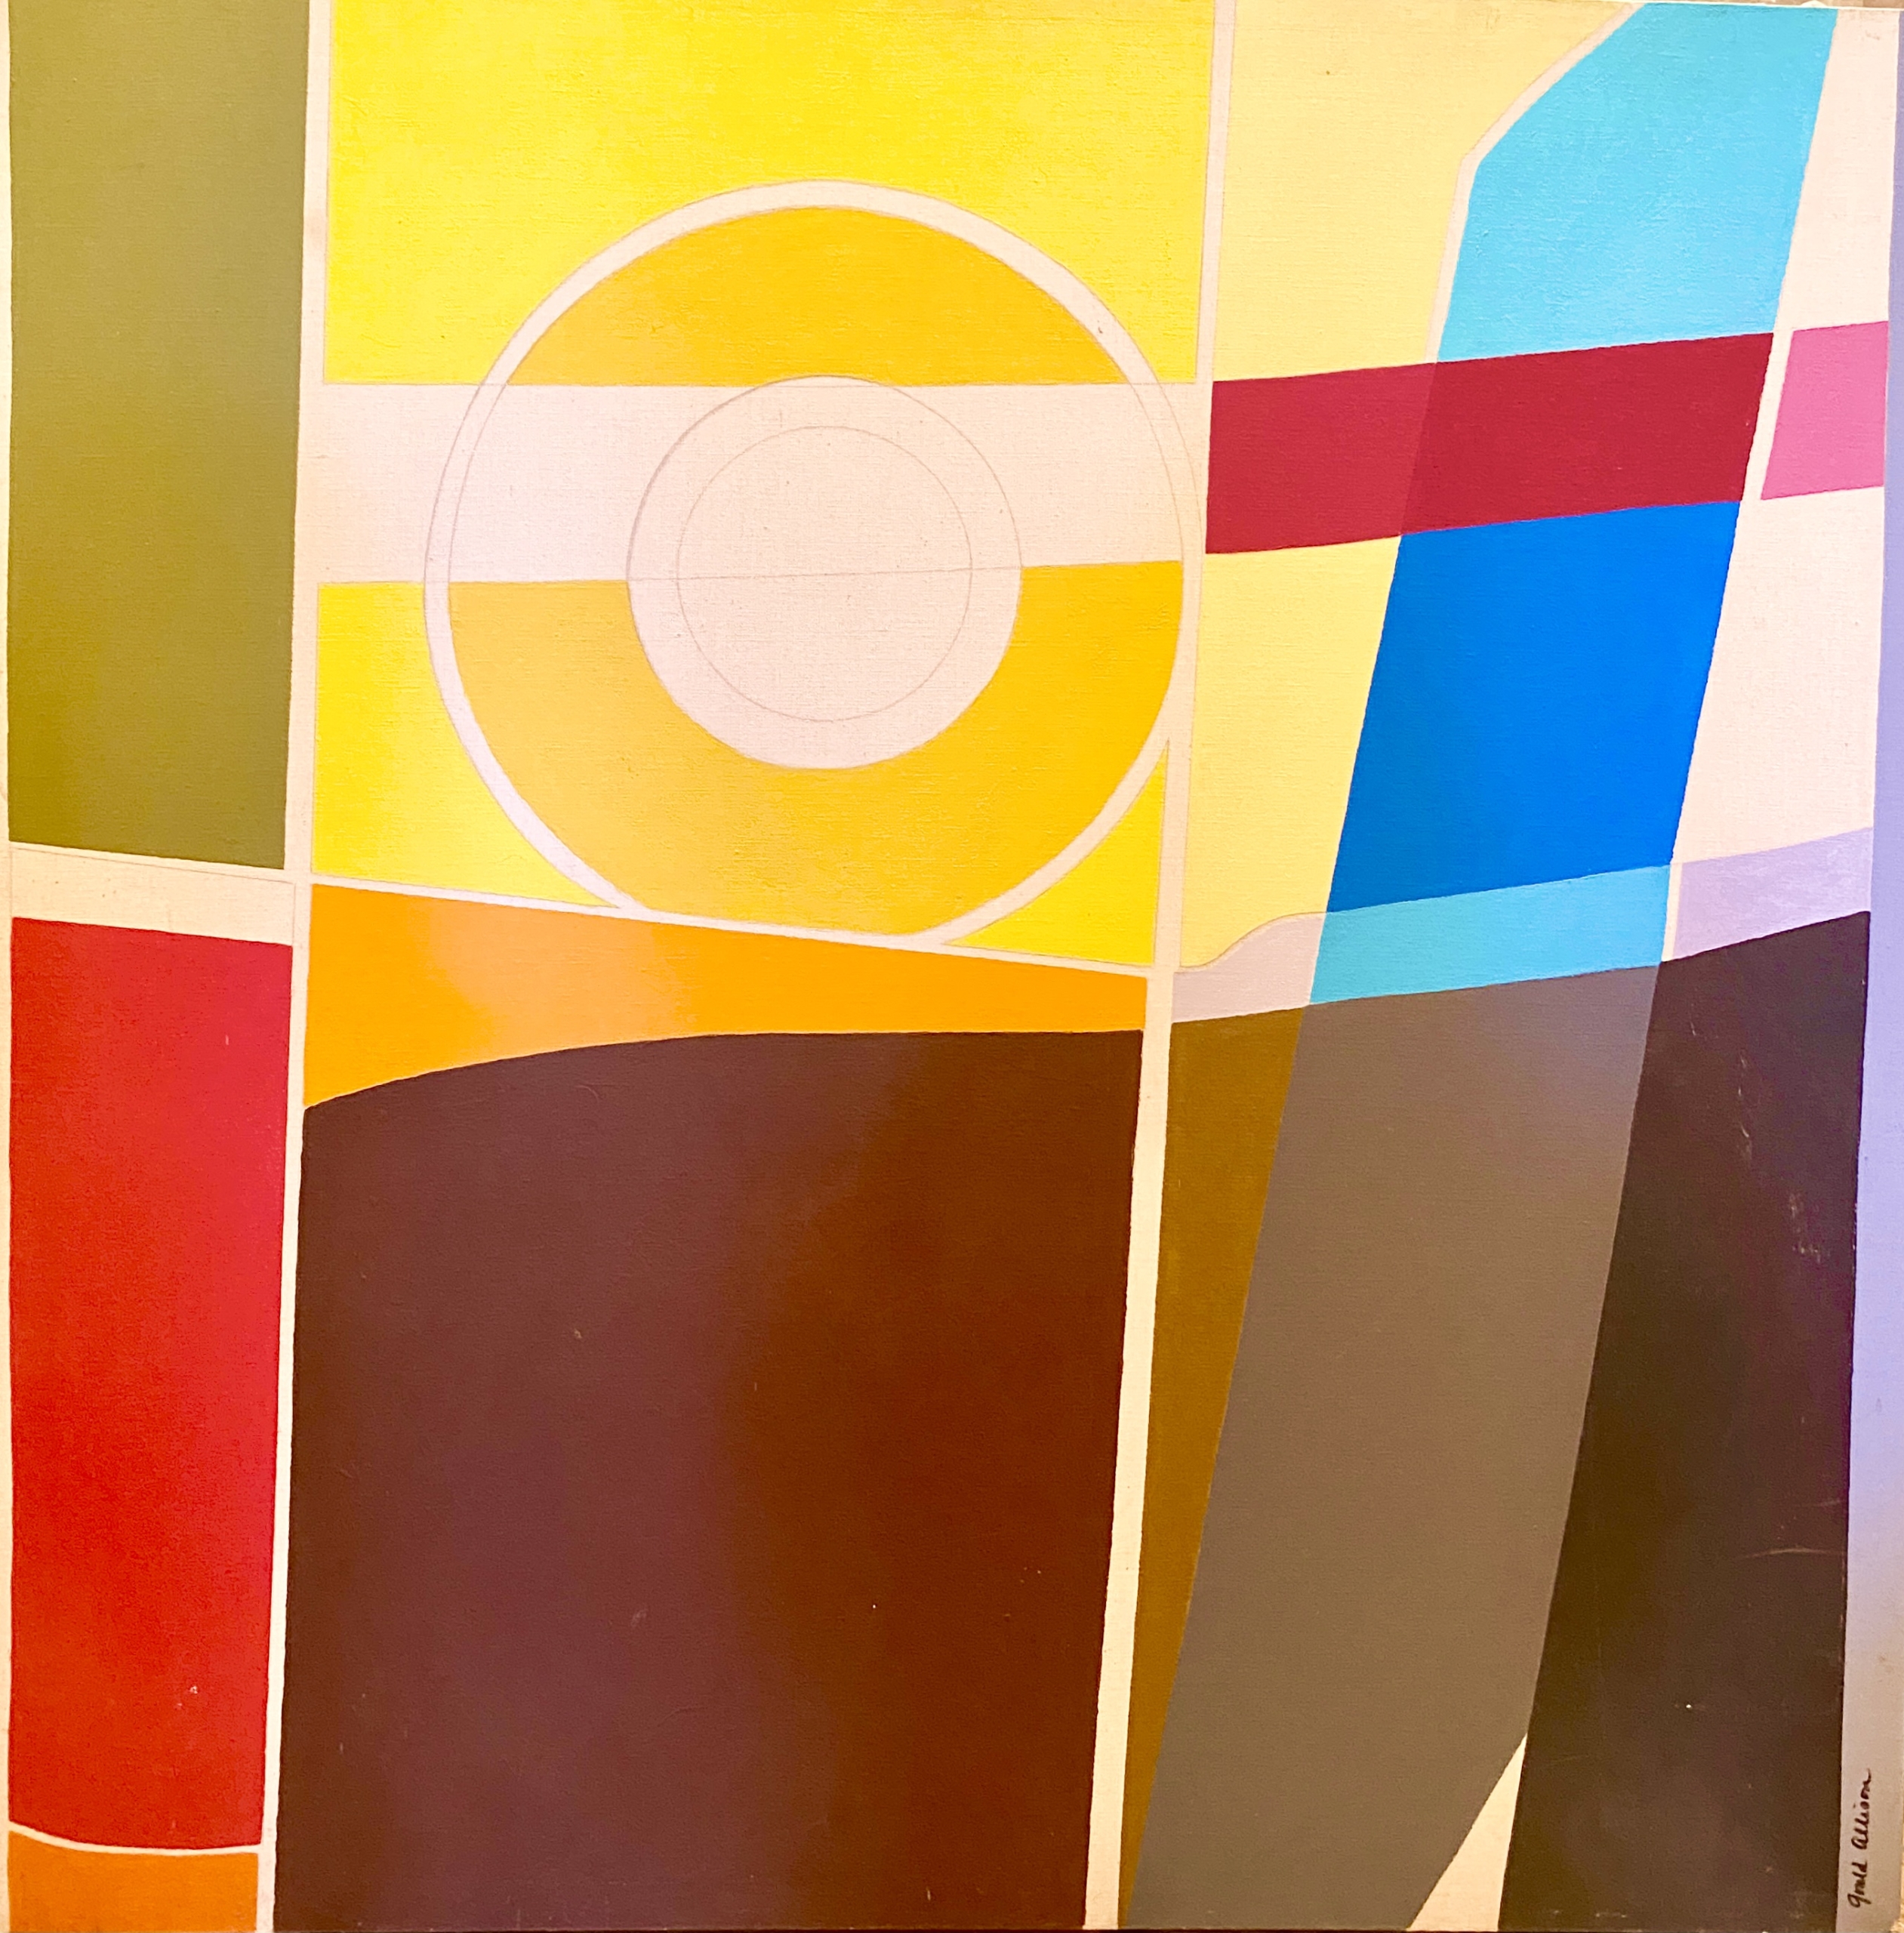 Abstract Painting by Gould Allison ( 1931 - 2015 ) titled Yellow Circle.